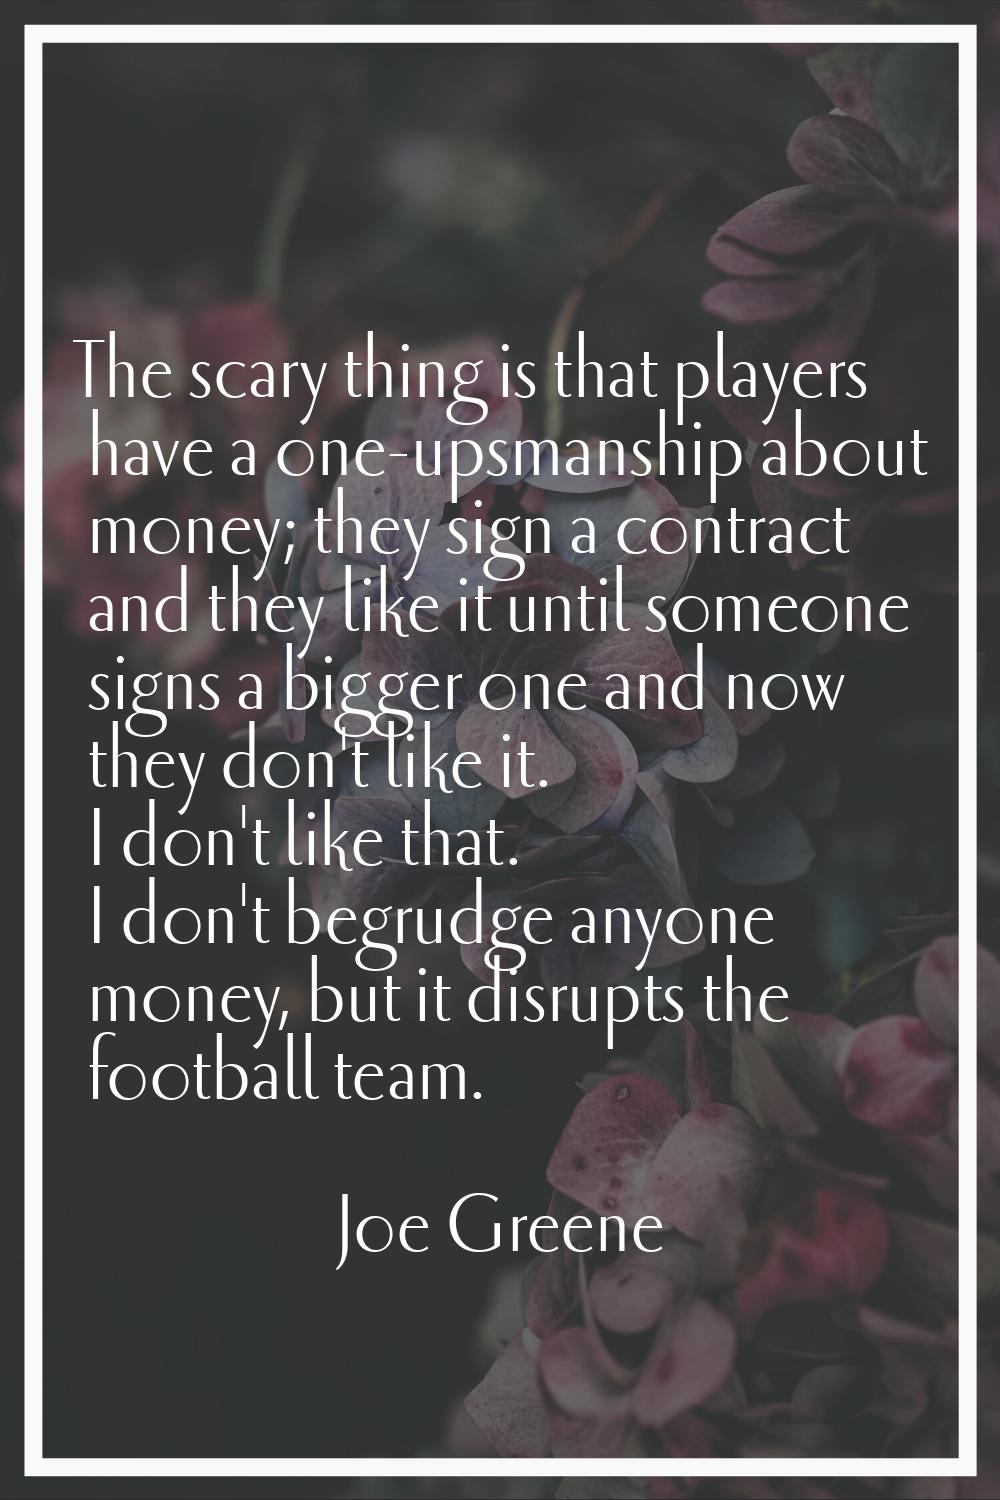 The scary thing is that players have a one-upsmanship about money; they sign a contract and they li